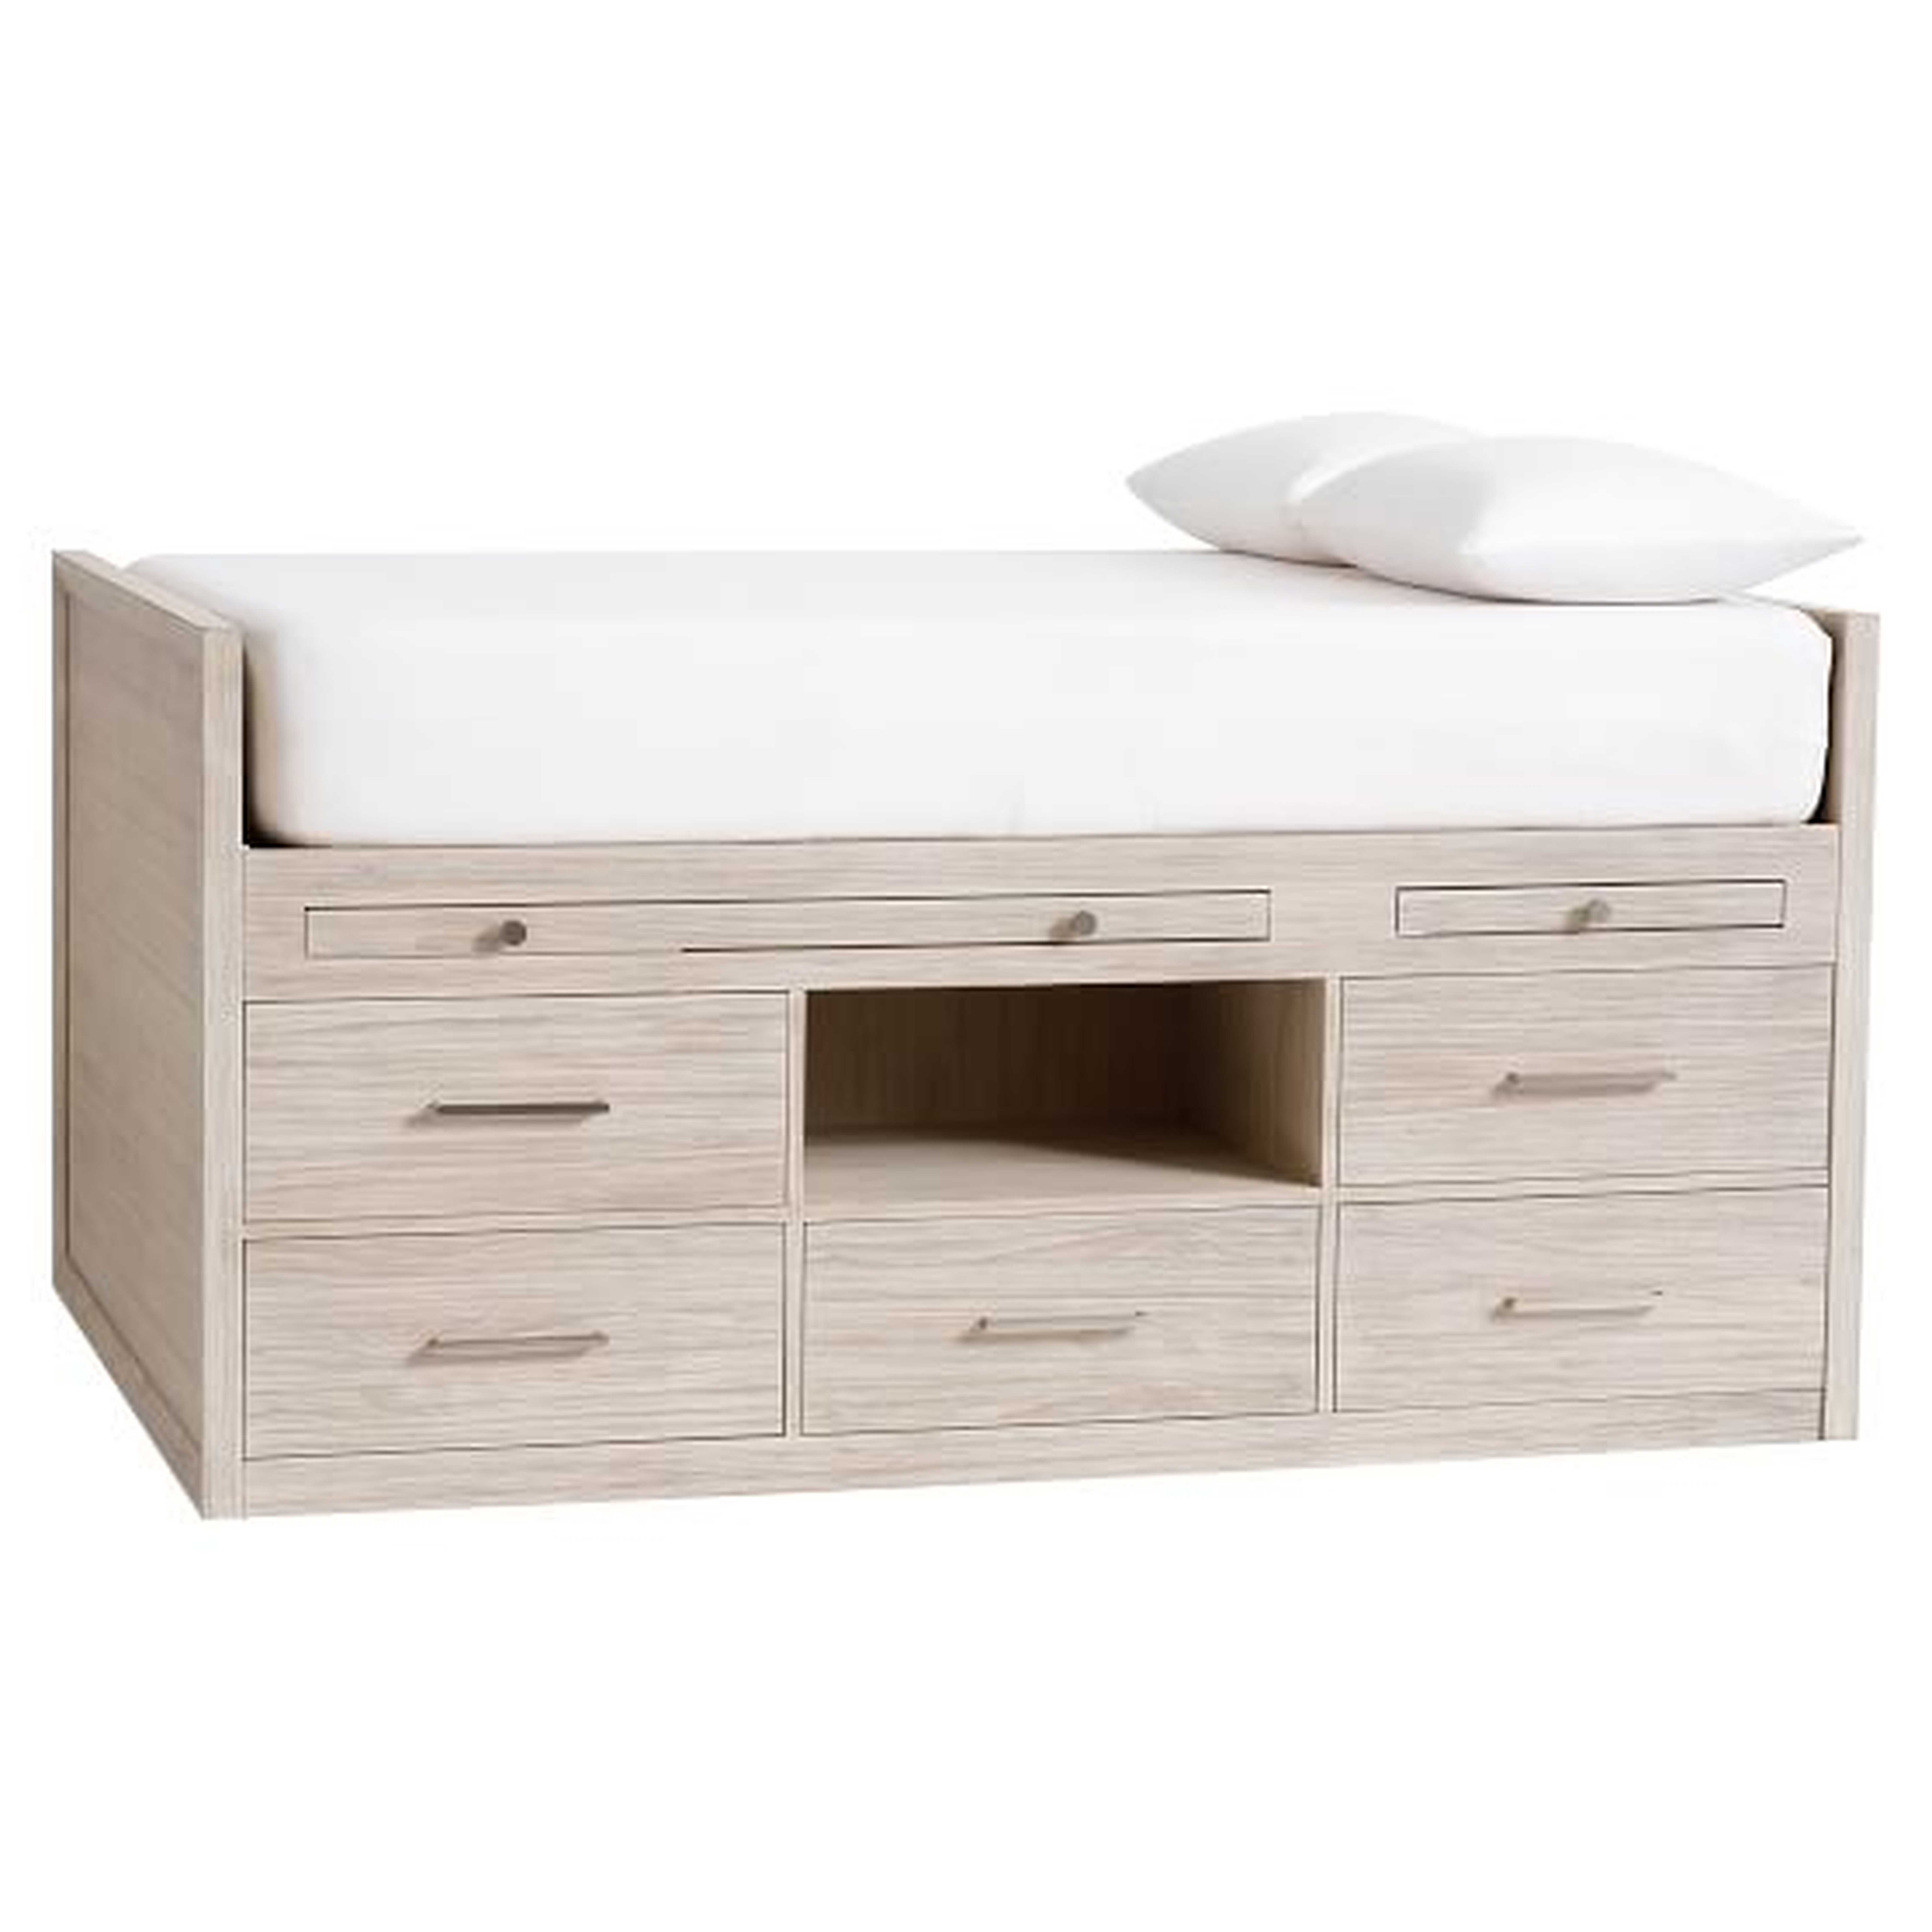 Cleary Captain's Bed - Pottery Barn Teen